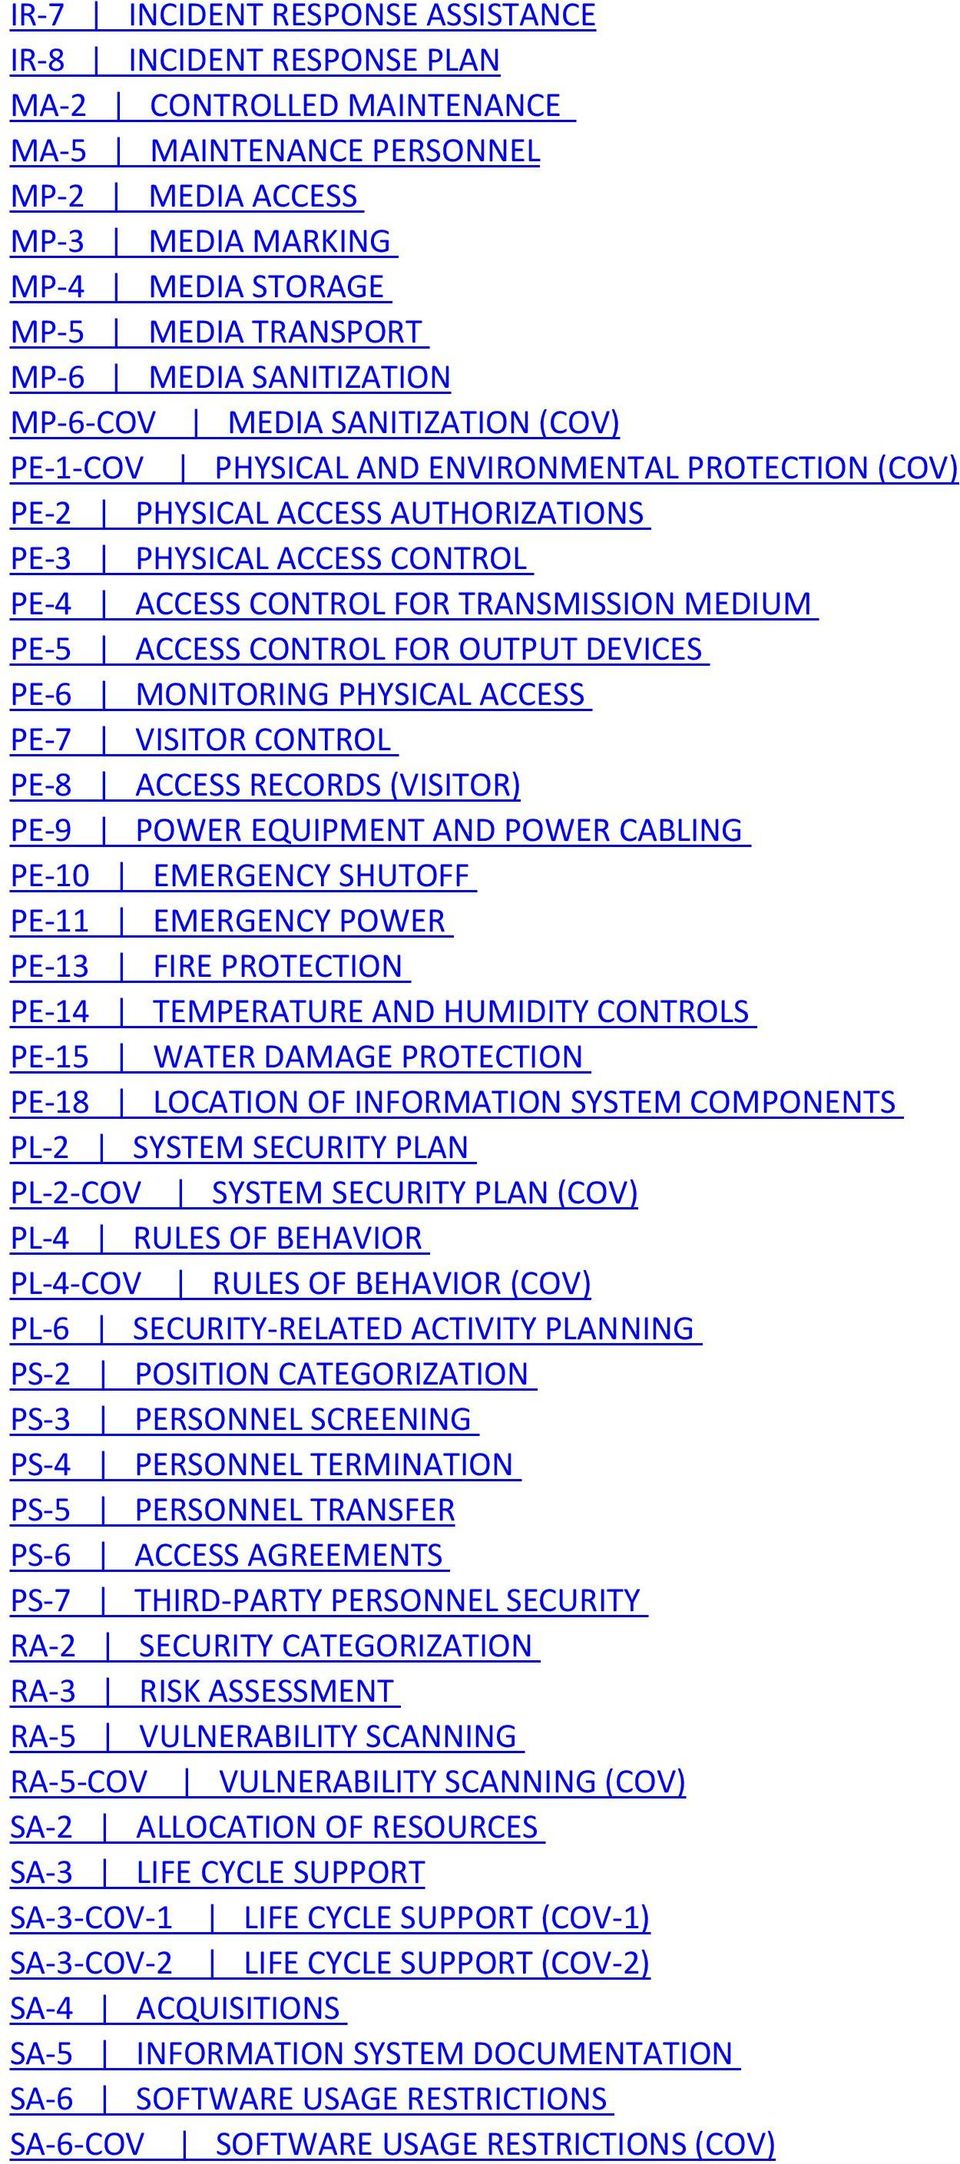 TRANSMISSION MEDIUM PE 5 ACCESS CONTROL FOR OUTPUT DEVICES PE 6 MONITORING PHYSICAL ACCESS PE 7 VISITOR CONTROL PE 8 ACCESS RECORDS (VISITOR) PE 9 POWER EQUIPMENT AND POWER CABLING PE 10 EMERGENCY